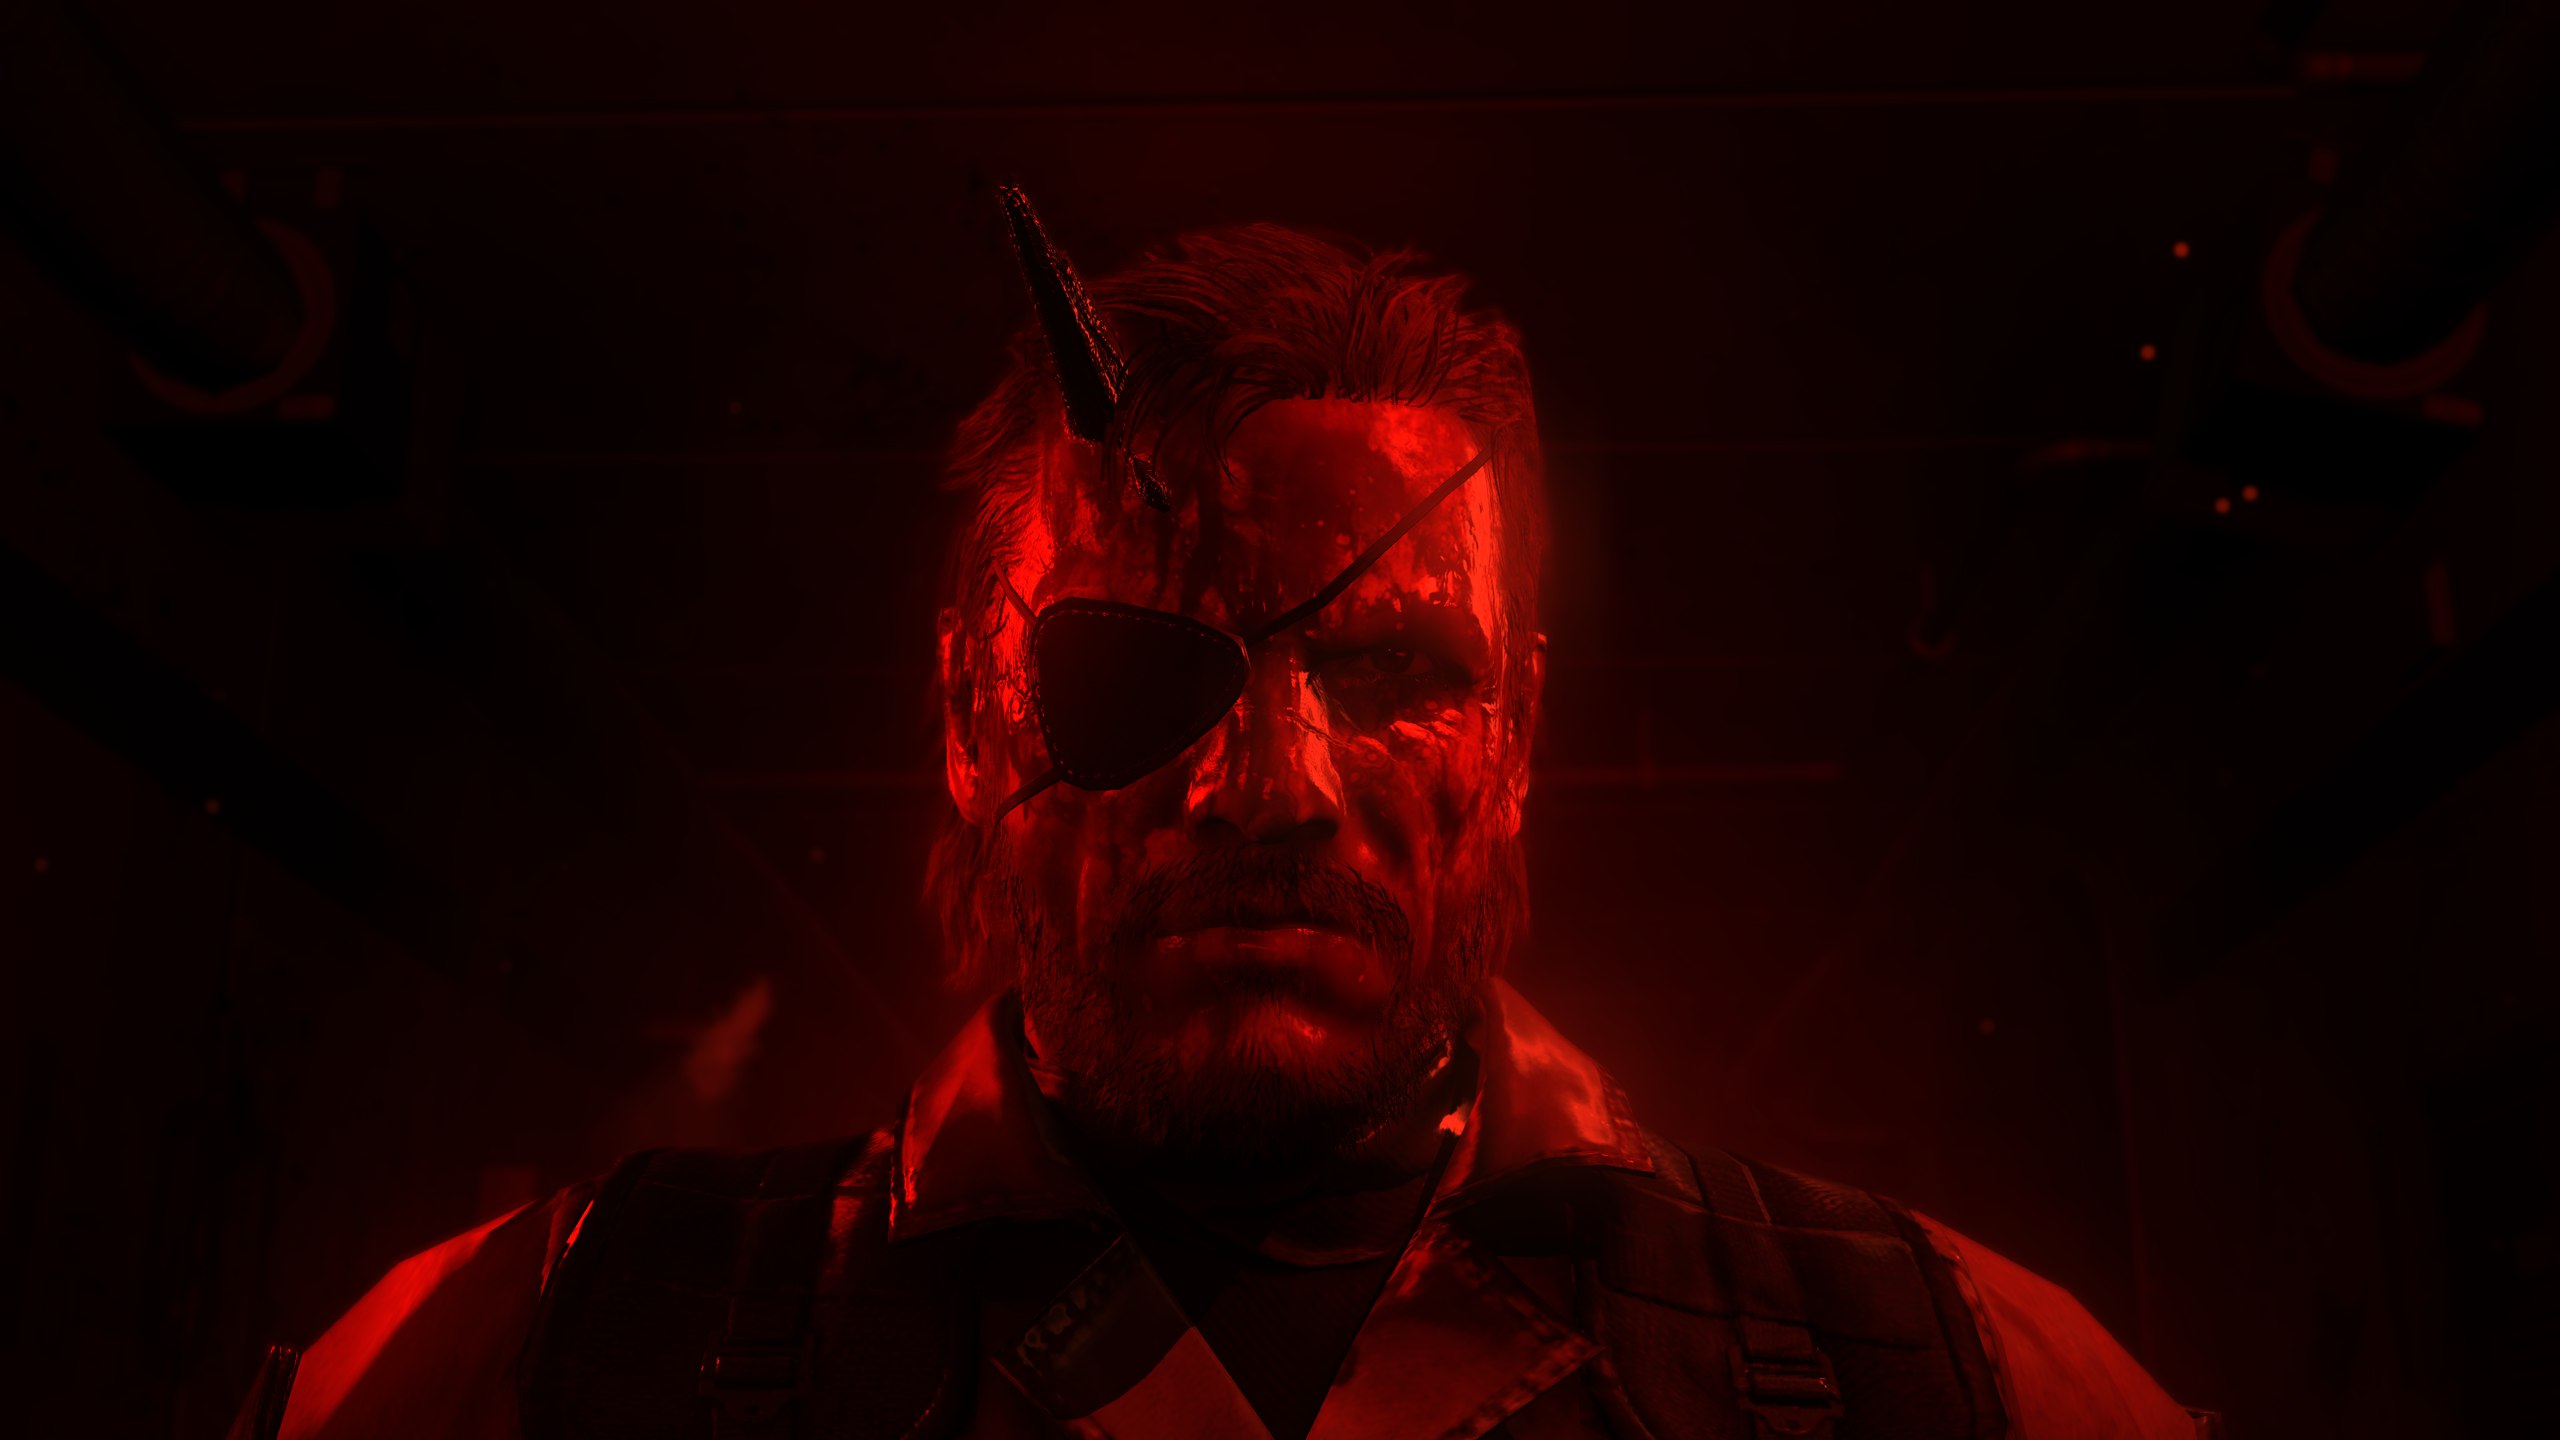 General 2560x1440 Metal Gear Solid V: The Phantom Pain snake video games screen shot red video game men face eyepatches Big Boss video game characters konami